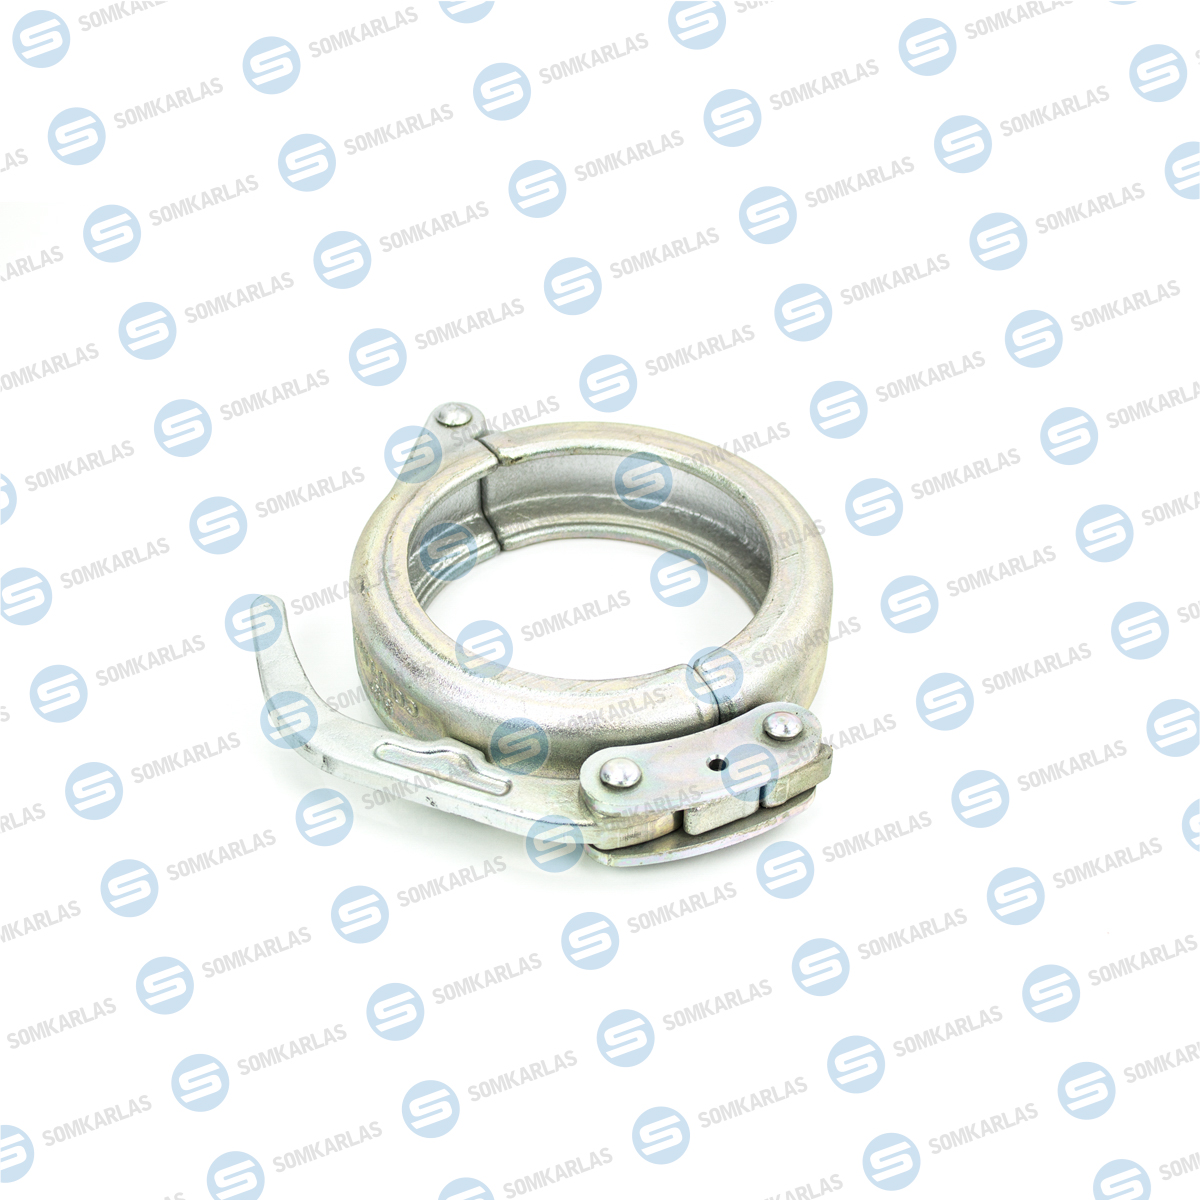 SOM20226 - CLAMP COUPLING 5,5 - 